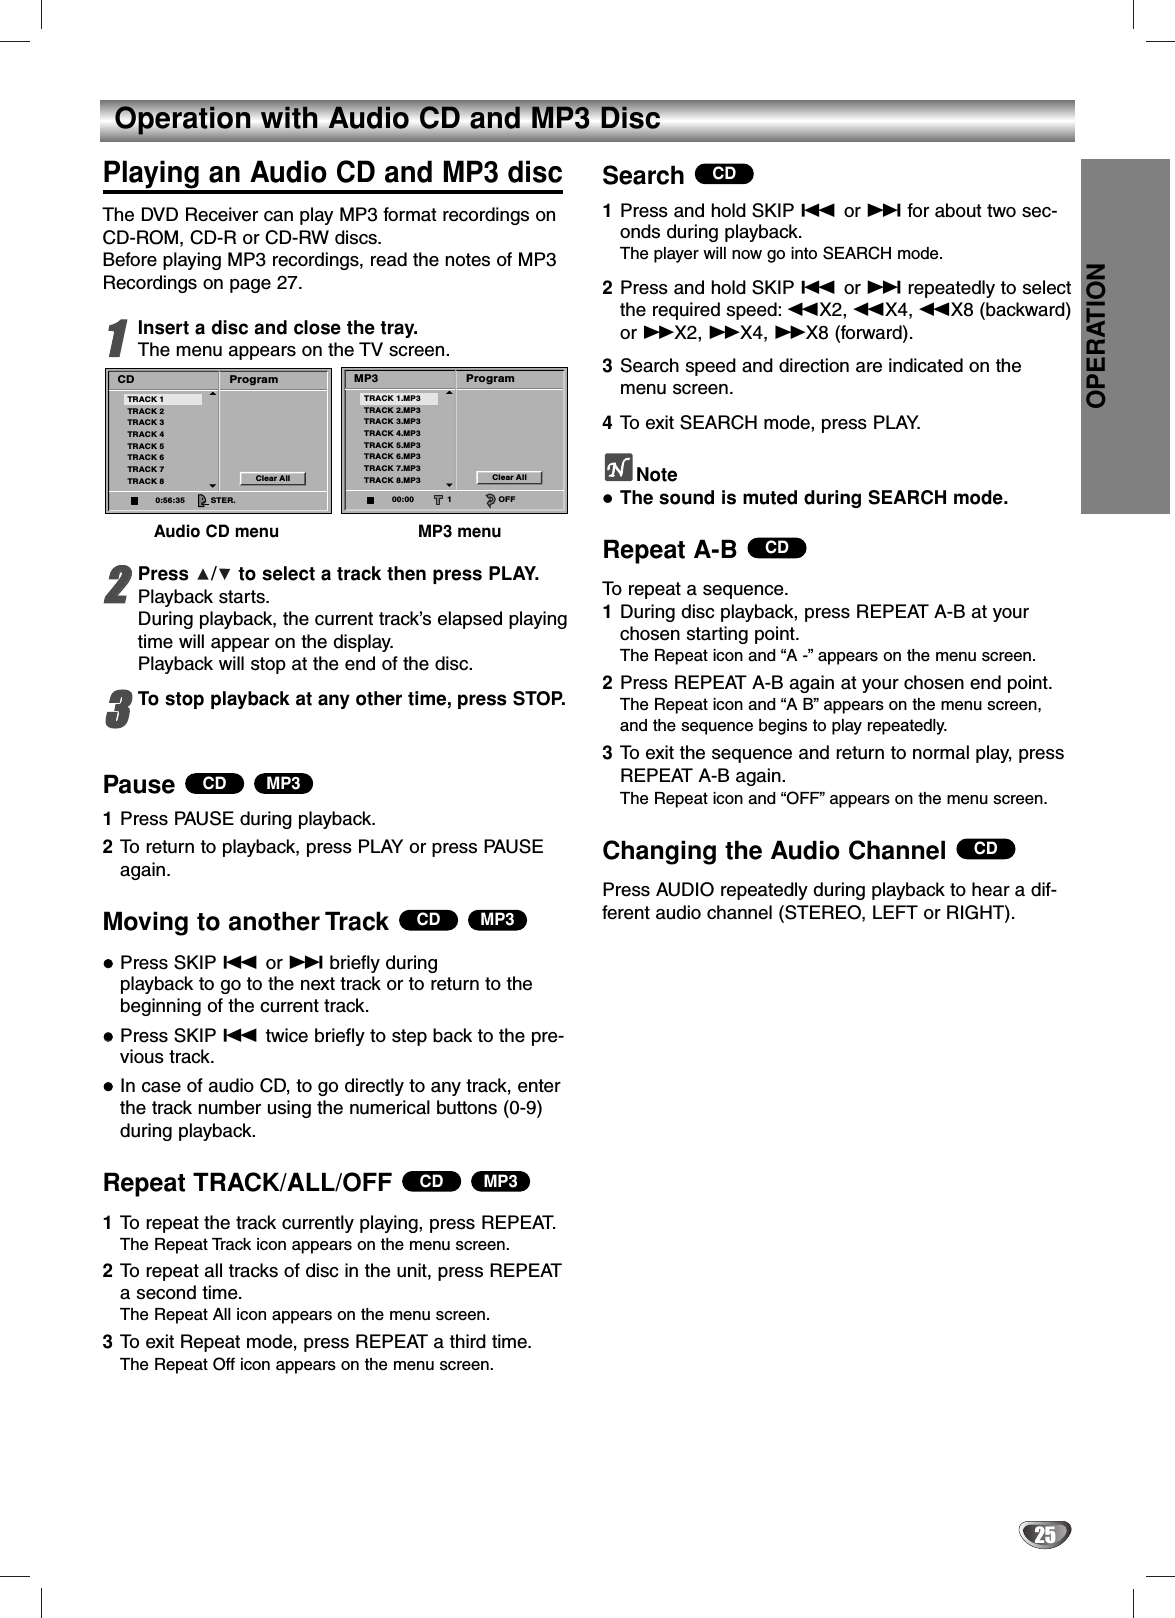 OPERATION25Operation with Audio CD and MP3 DiscPlaying an Audio CD and MP3 discThe DVD Receiver can play MP3 format recordings onCD-ROM, CD-R or CD-RW discs.Before playing MP3 recordings, read the notes of MP3Recordings on page 27.11Insert a disc and close the tray.The menu appears on the TV screen.Audio CD menu MP3 menu22Press  /to select a track then press PLAY.Playback starts.During playback, the current track’s elapsed playingtime will appear on the display.Playback will stop at the end of the disc.33To stop playback at any other time, press STOP.Pause 1Press PAUSE during playback.2To return to playback, press PLAY or press PAUSEagain.Moving to another Track Press SKIP .or &gt;briefly during playback to go to the next track or to return to thebeginning of the current track.Press SKIP .twice briefly to step back to the pre-vious track.In case of audio CD, to go directly to any track, enterthe track number using the numerical buttons (0-9)during playback.Repeat TRACK/ALL/OFF1To repeat the track currently playing, press REPEAT.The Repeat Track icon appears on the menu screen.2To repeat all tracks of disc in the unit, press REPEATa second time.The Repeat All icon appears on the menu screen.3To exit Repeat mode, press REPEAT a third time.The Repeat Off icon appears on the menu screen.Search 1Press and hold SKIP .or &gt;for about two sec-onds during playback.The player will now go into SEARCH mode.2Press and hold SKIP .or &gt;repeatedly to selectthe required speed: mX2, mX4, mX8 (backward)or MX2, MX4, MX8 (forward).3Search speed and direction are indicated on themenu screen.4To exit SEARCH mode, press PLAY.NoteThe sound is muted during SEARCH mode.Repeat A-B To repeat a sequence.1During disc playback, press REPEAT A-B at your chosen starting point.The Repeat icon and “A -”appears on the menu screen.2Press REPEAT A-B again at your chosen end point.The Repeat icon and “A B”appears on the menu screen,and the sequence begins to play repeatedly.3To exit the sequence and return to normal play, pressREPEAT A-B again.The Repeat icon and “OFF”appears on the menu screen.Changing the Audio Channel Press AUDIO repeatedly during playback to hear a dif-ferent audio channel (STEREO, LEFT or RIGHT).CDCDCDMP3CDMP3CDMP3CDProgramCDClear AllTRACK 1TRACK 2TRACK 3TRACK 4TRACK 5TRACK 6TRACK 7TRACK 80:56:35 STER.ProgramMP3Clear AllTRACK 1.MP3TRACK 2.MP3TRACK 3.MP3TRACK 4.MP3TRACK 5.MP3TRACK 6.MP3TRACK 7.MP3TRACK 8.MP300:00 1 OFF